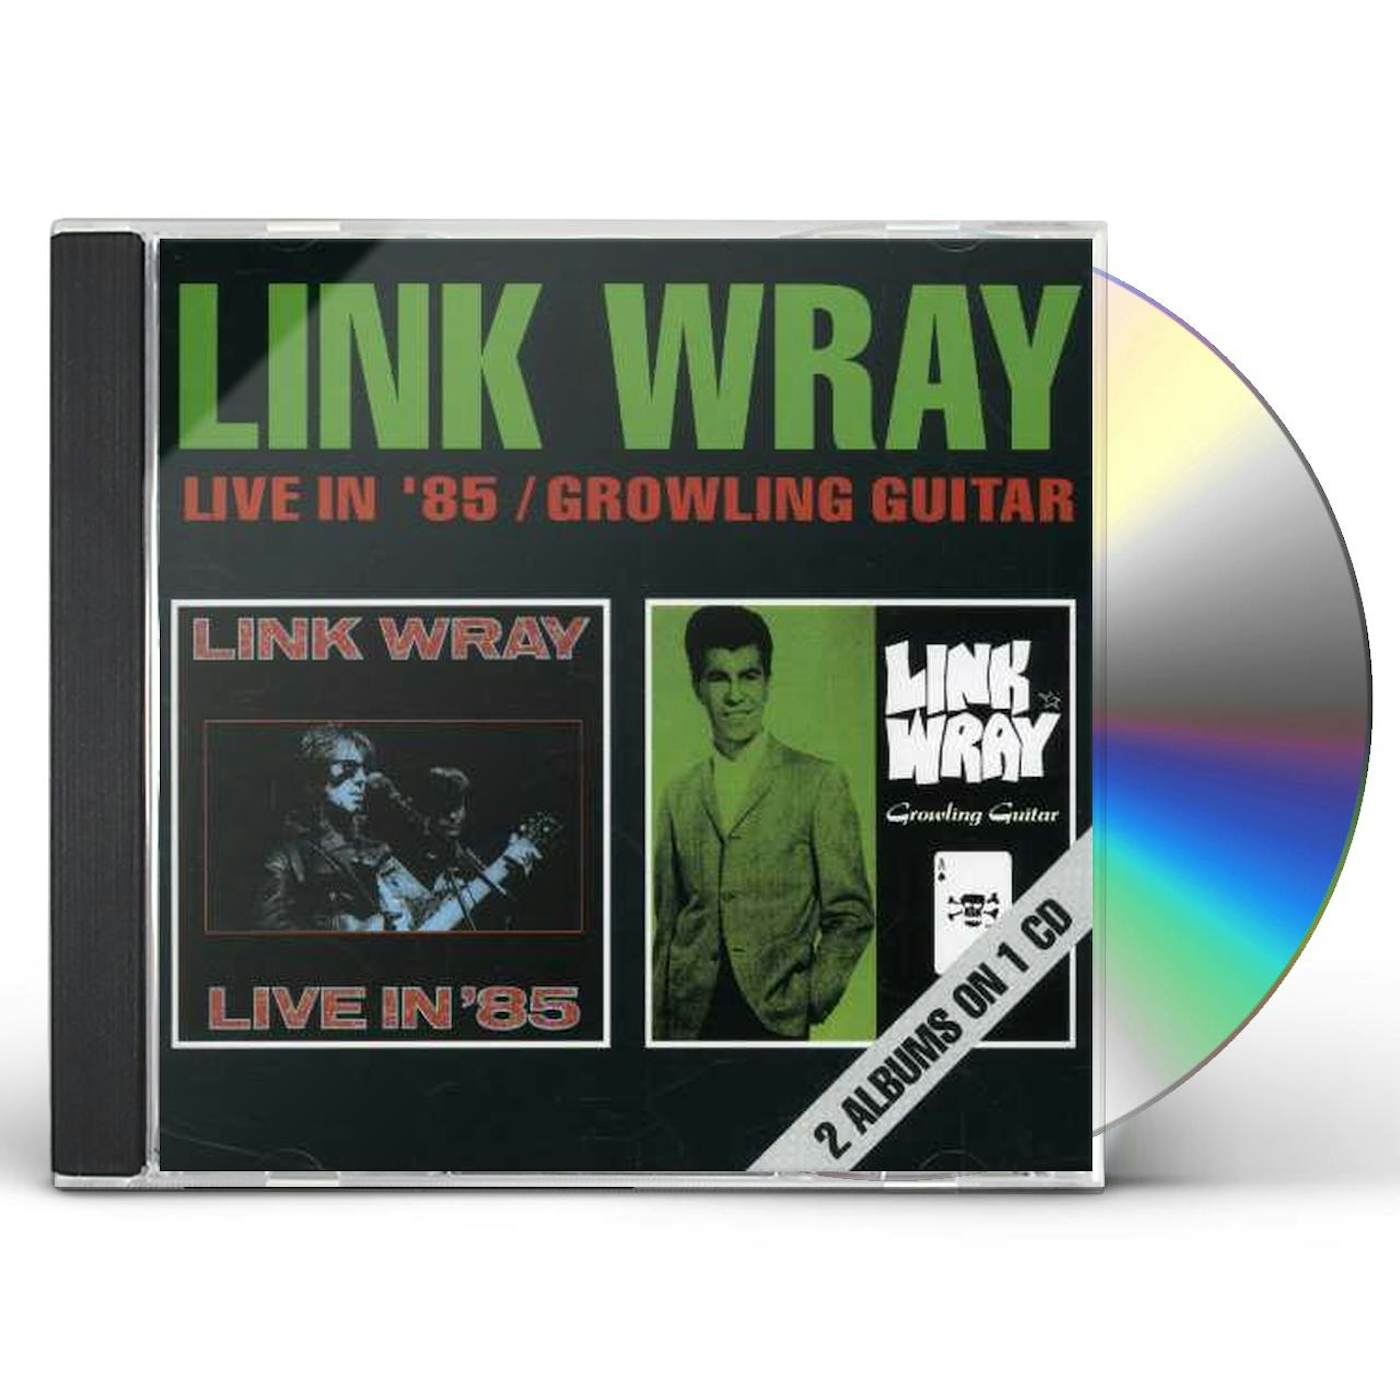 Link Wray LIVE IN '85 / GROWLING GUITAR CD